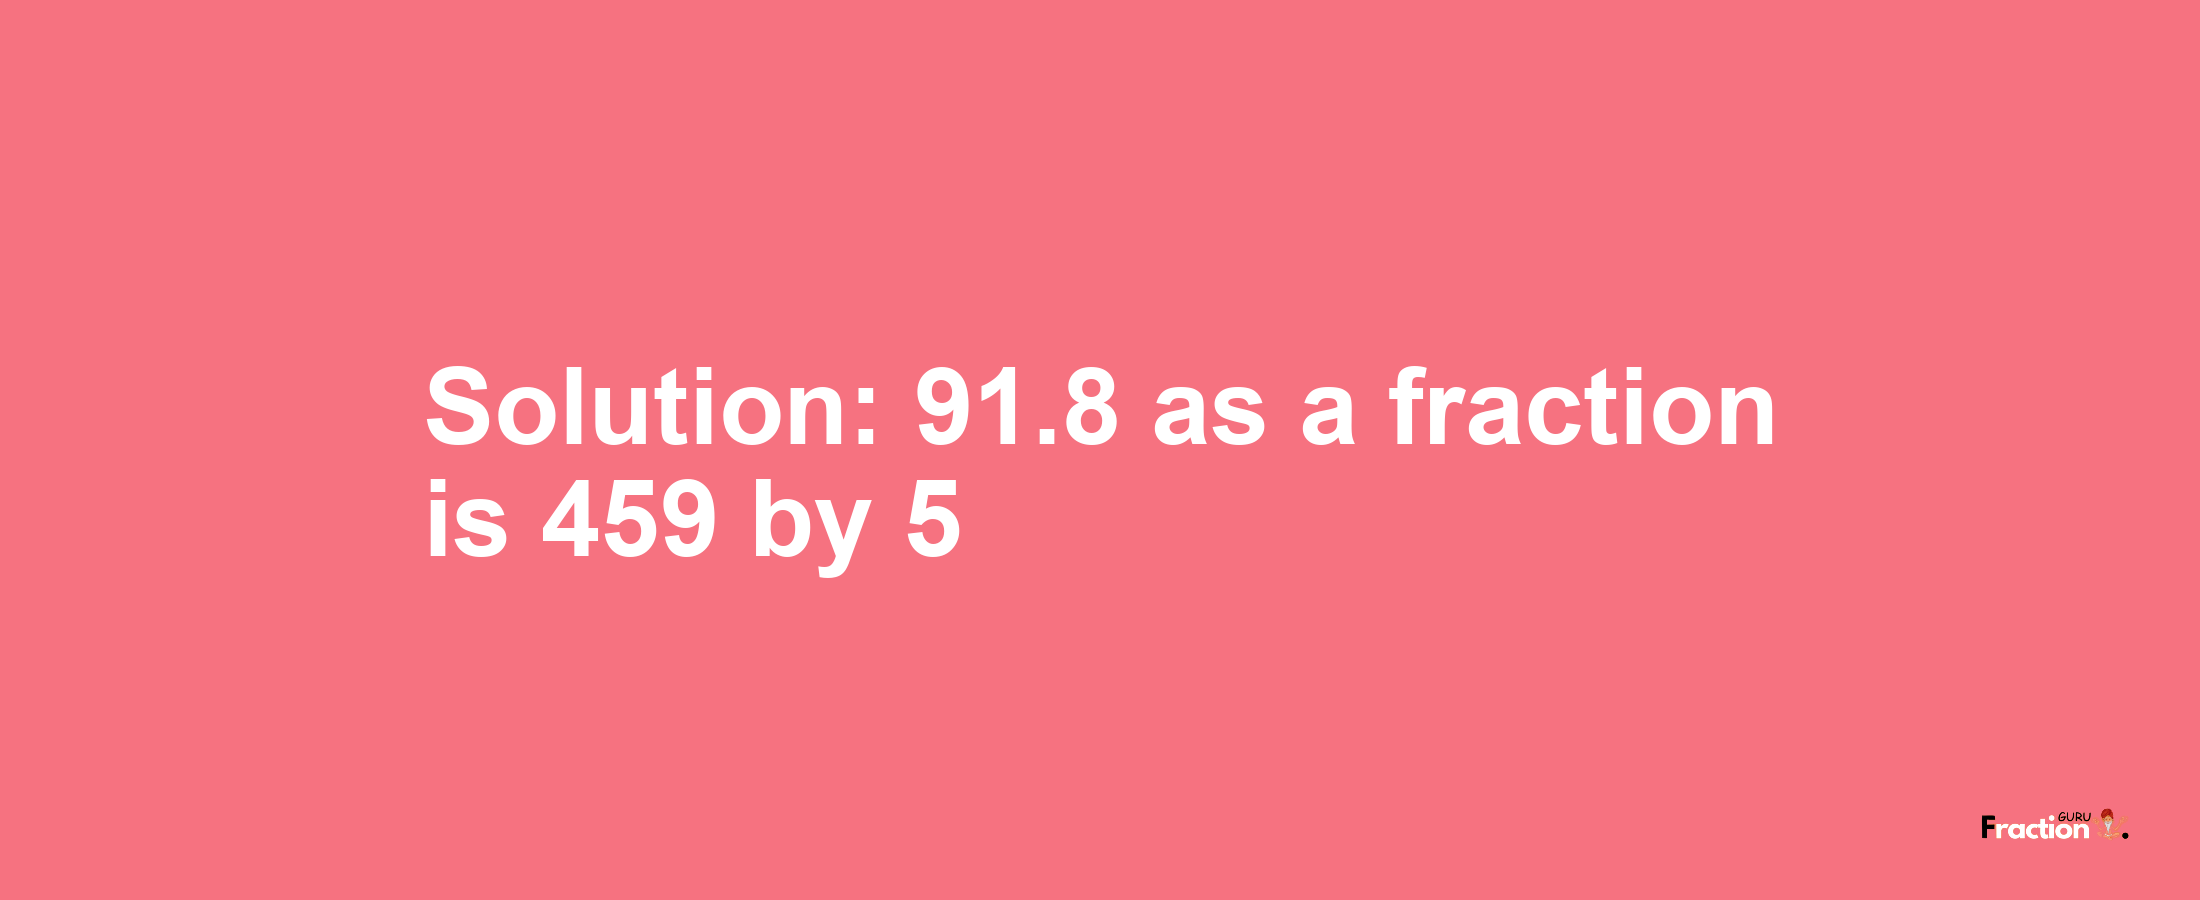 Solution:91.8 as a fraction is 459/5